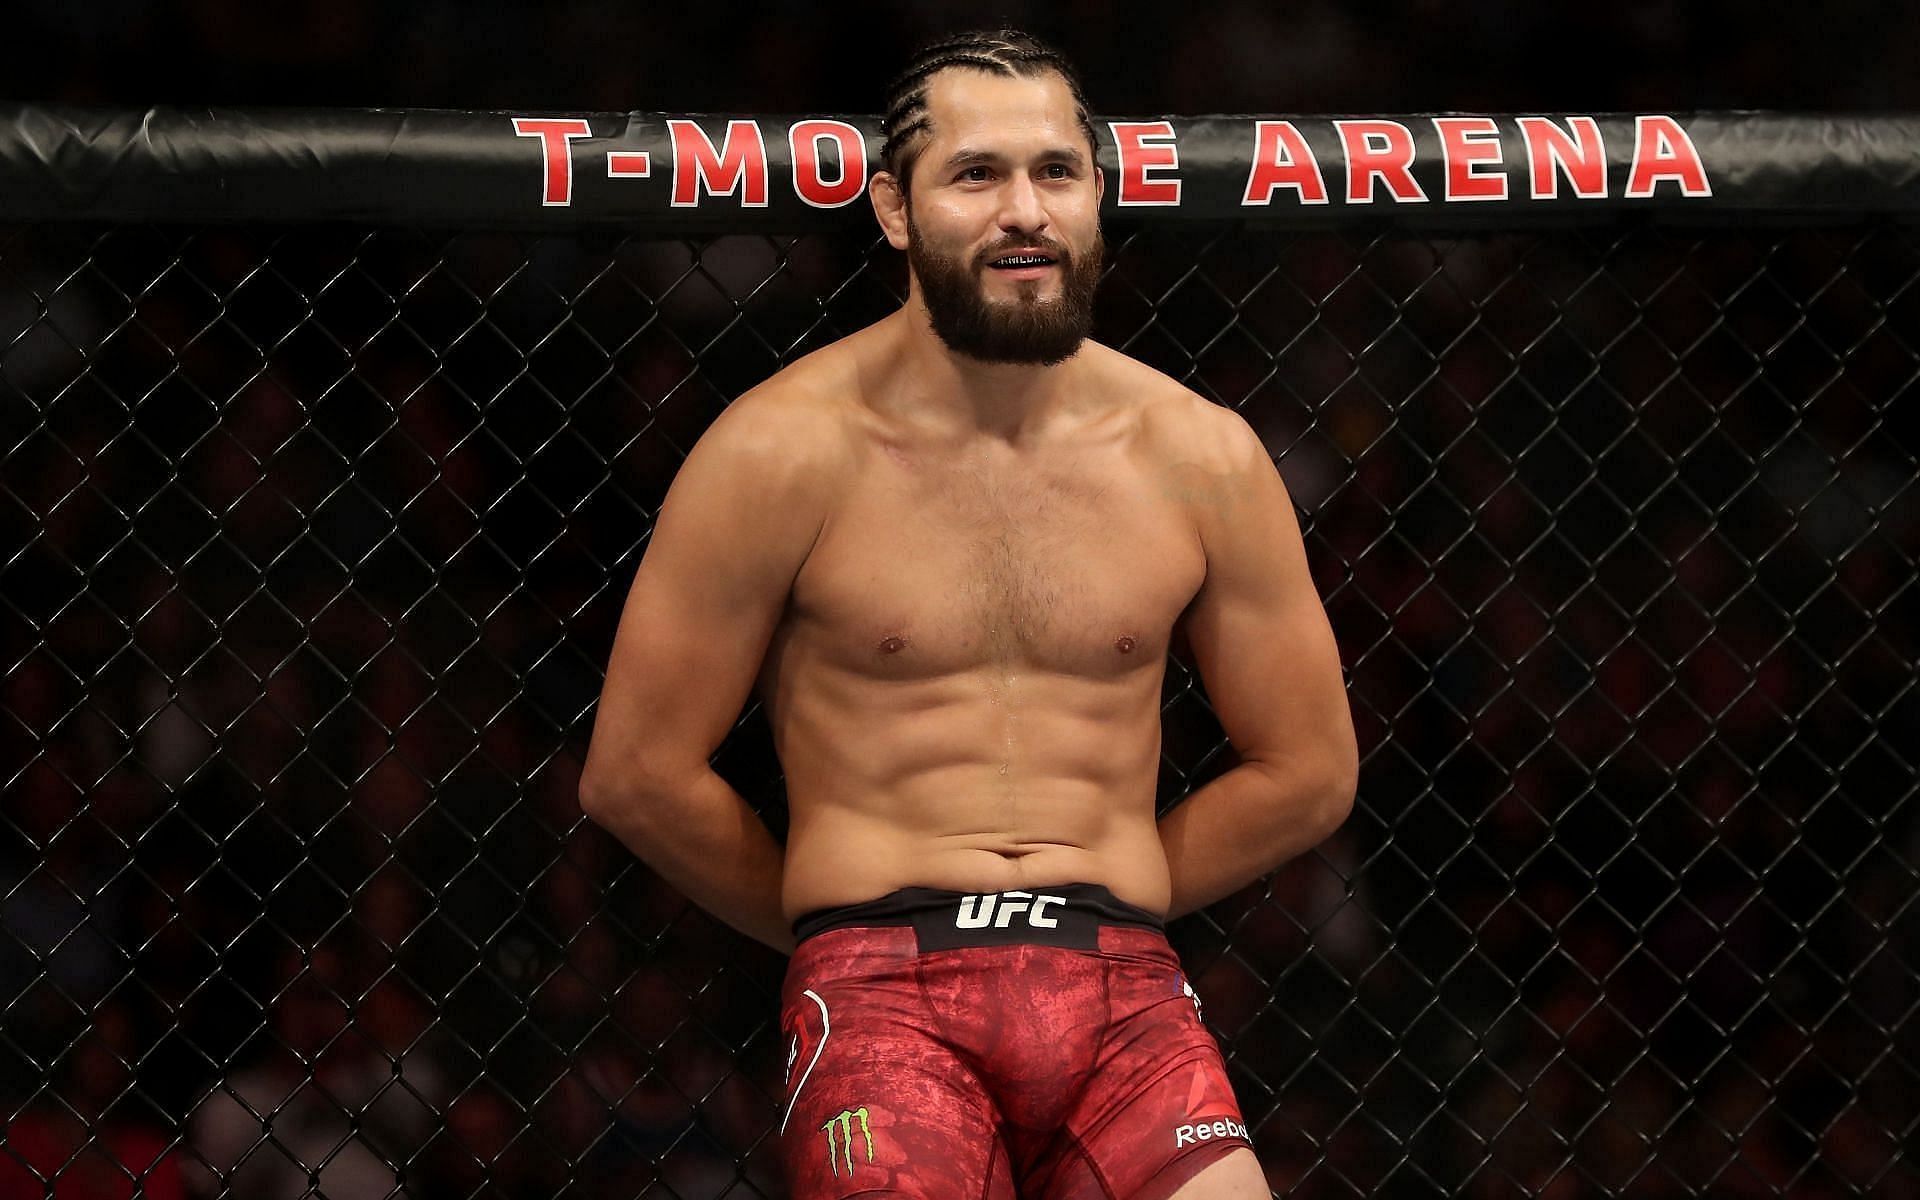 Jorge Masvidal already unsuccessfully challenged for the welterweight title twice